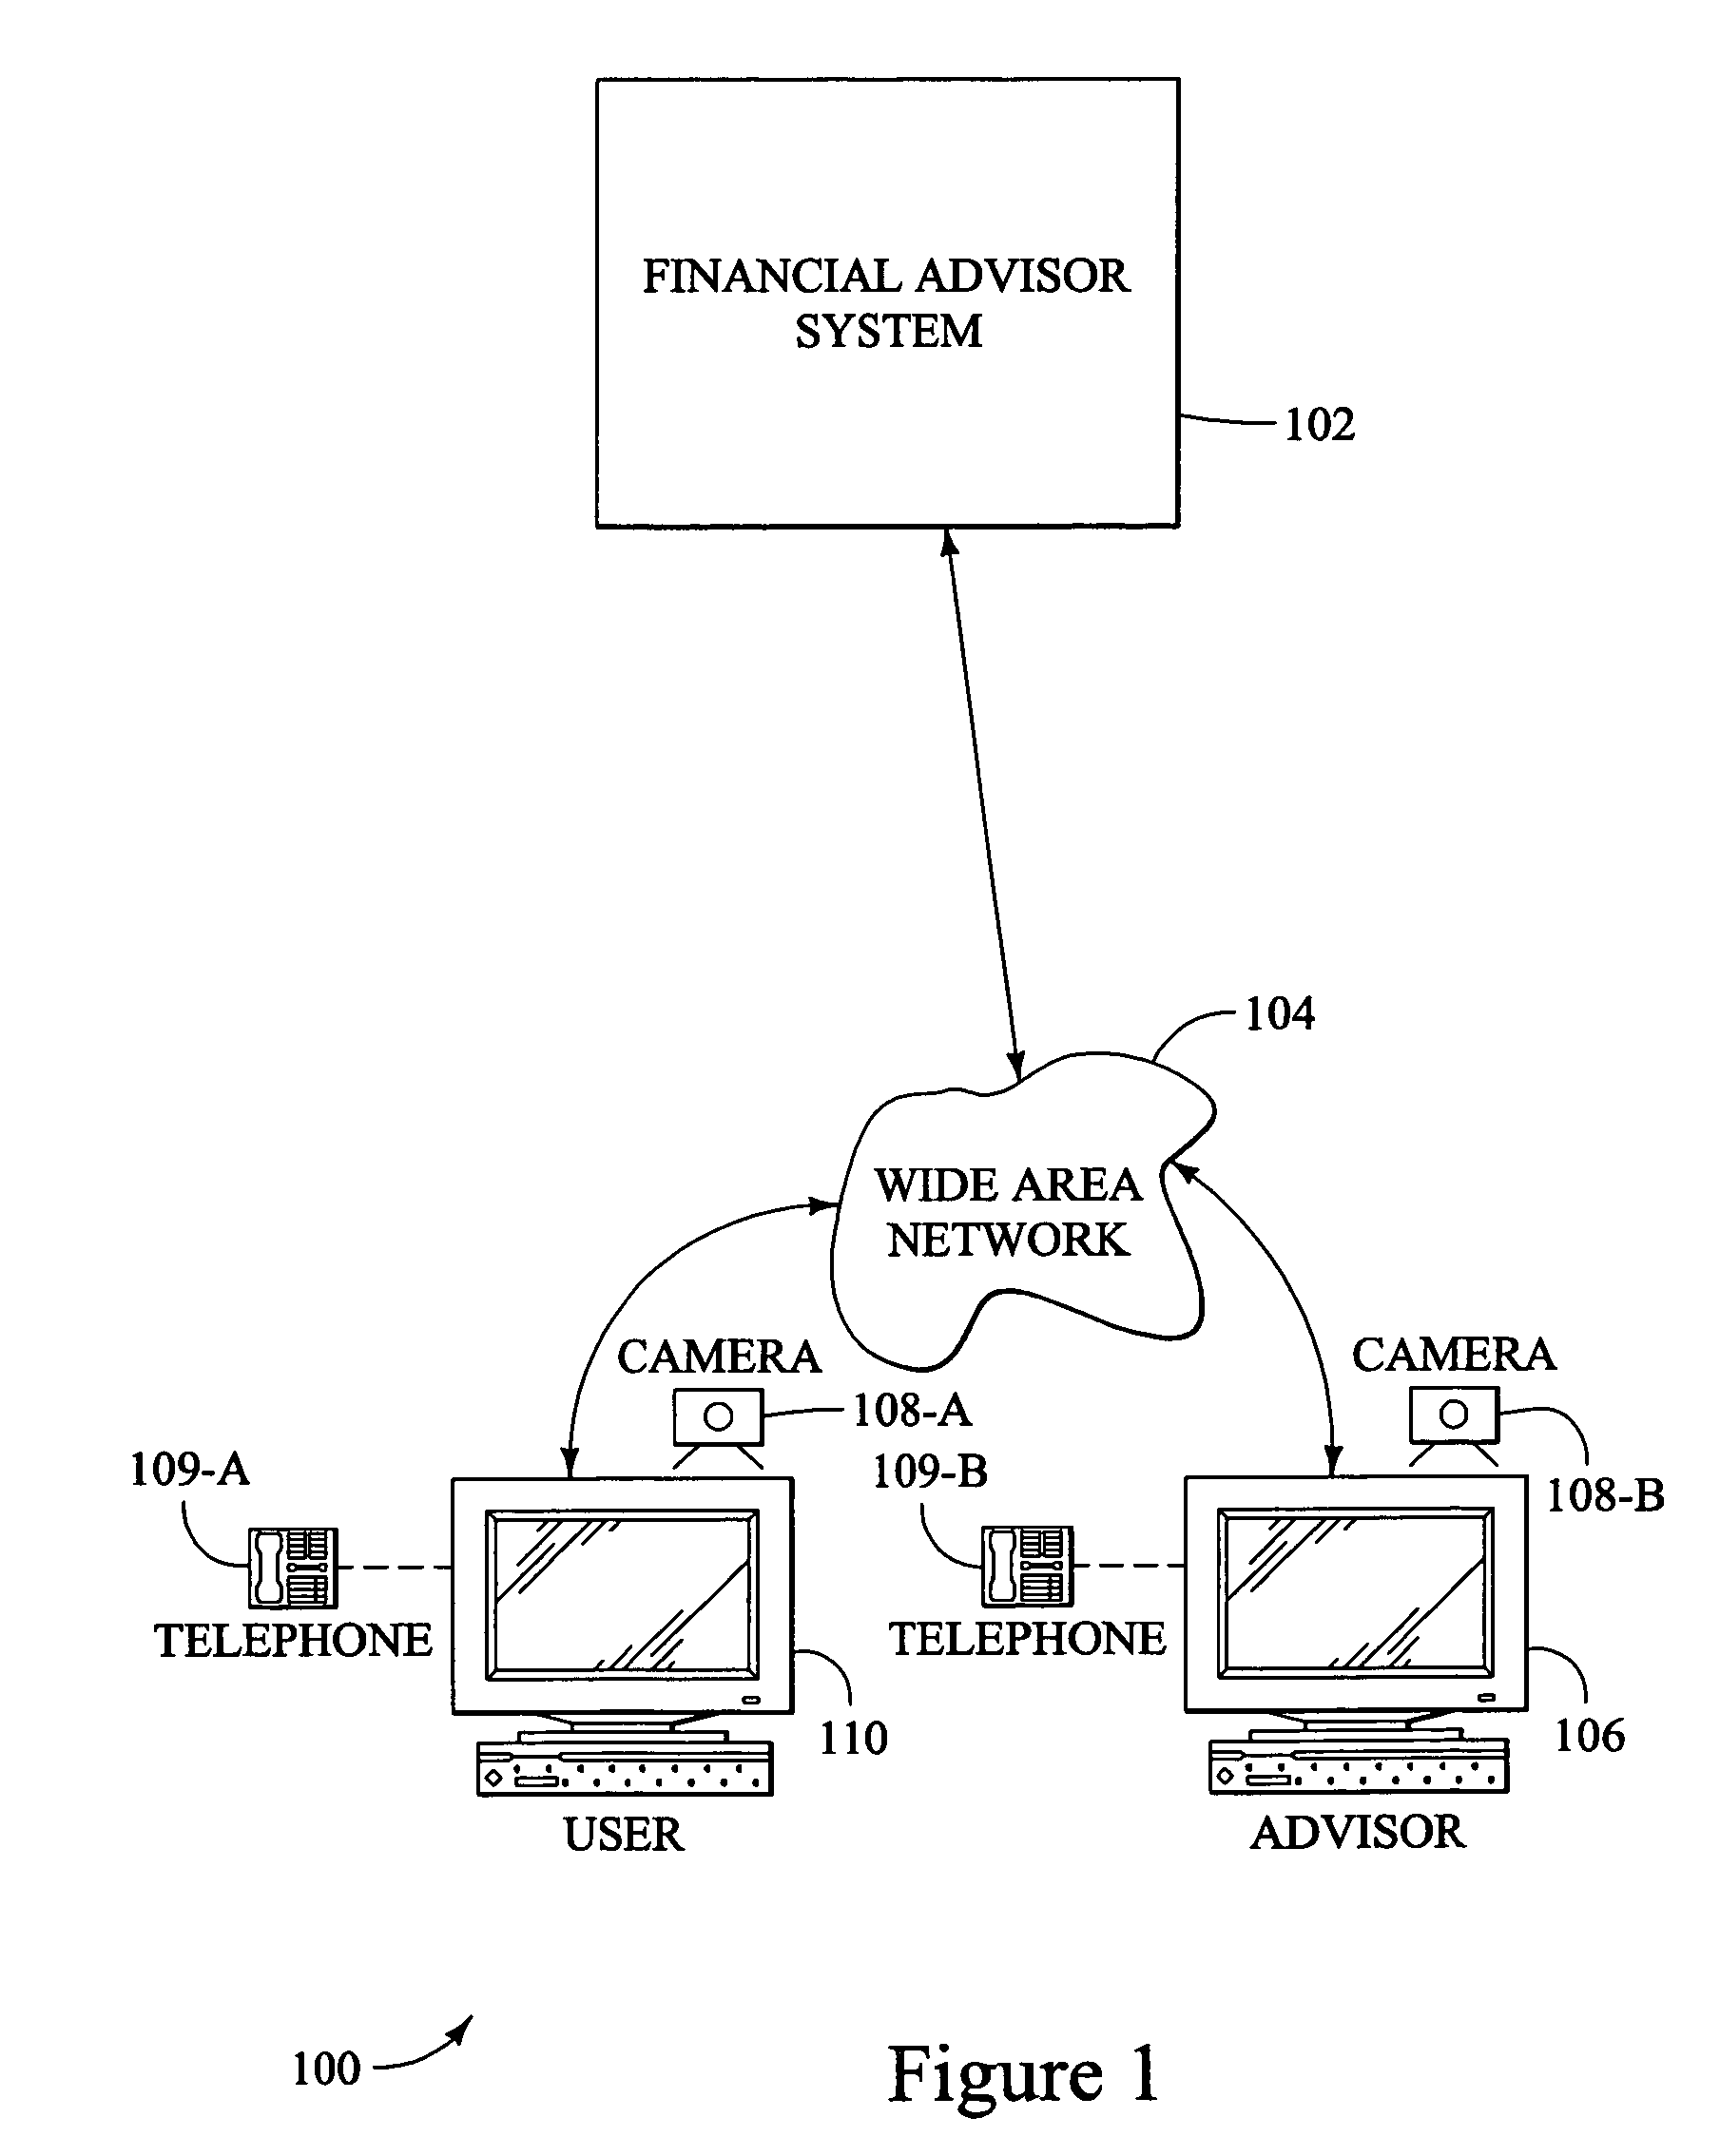 Communication interface for a financial modeling and counseling system